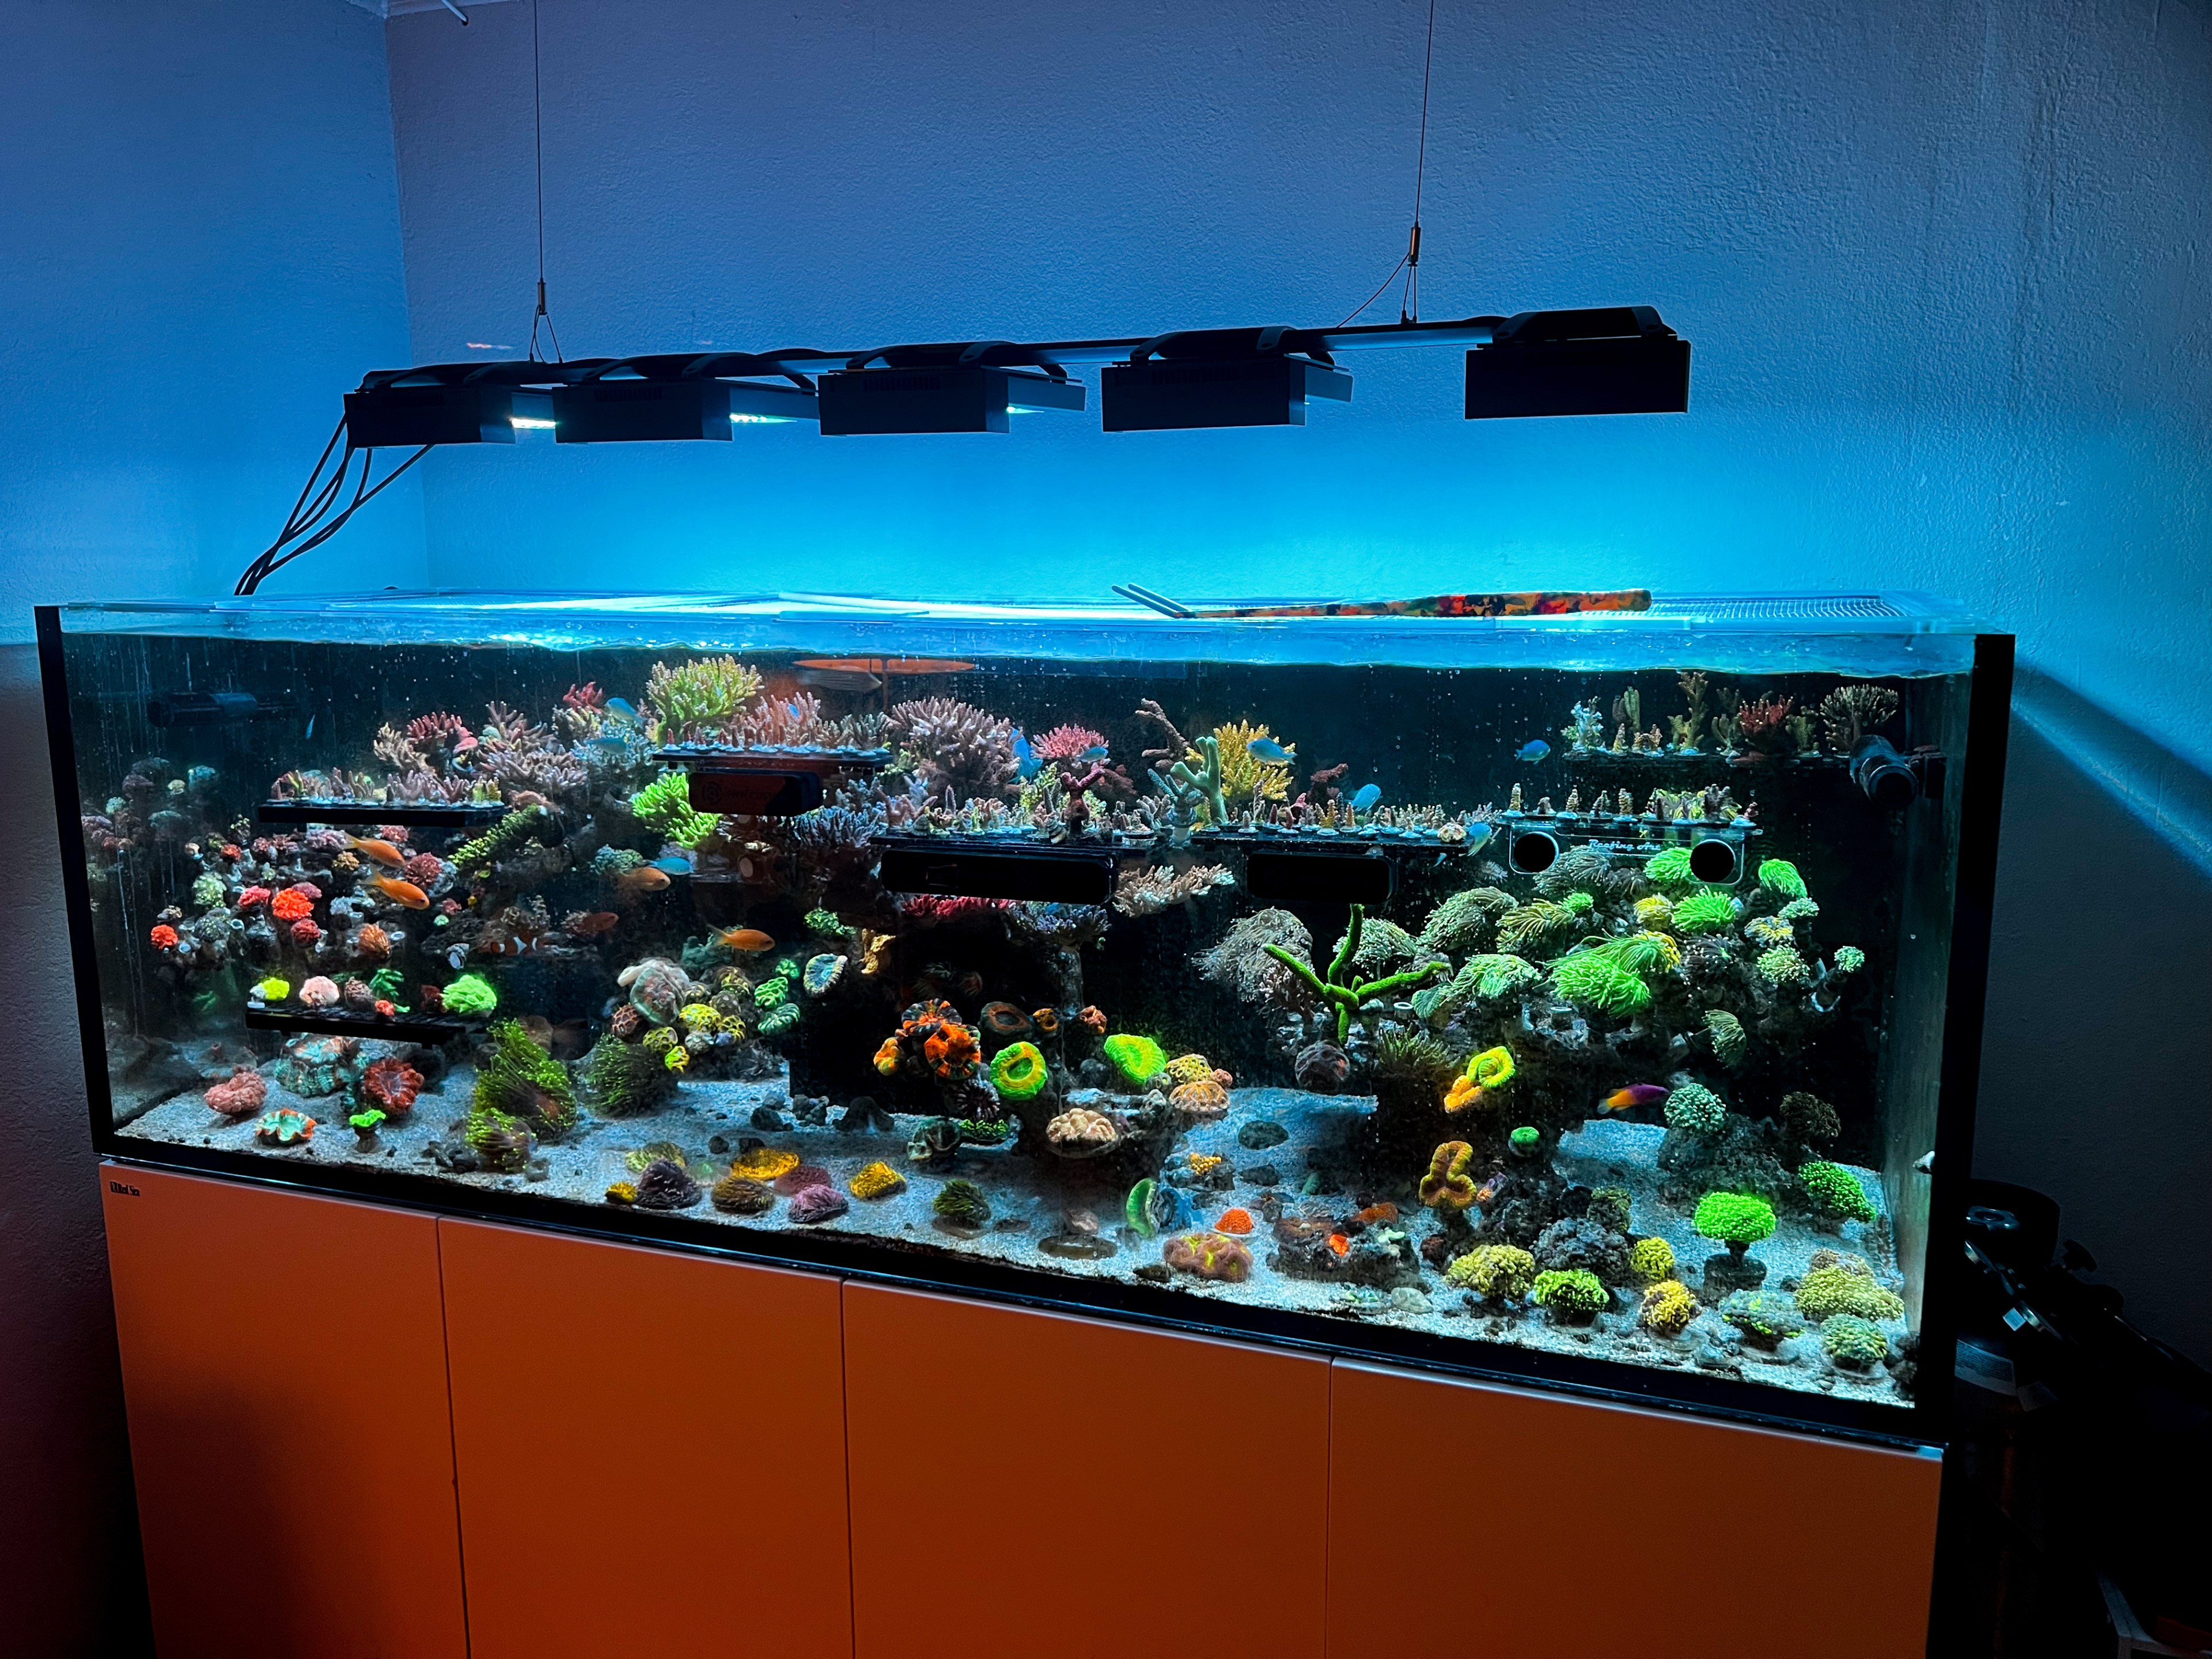 A vibrant aquarium with various corals and fish, illuminated by overhead lights, set against a blue wall and on an orange stand.